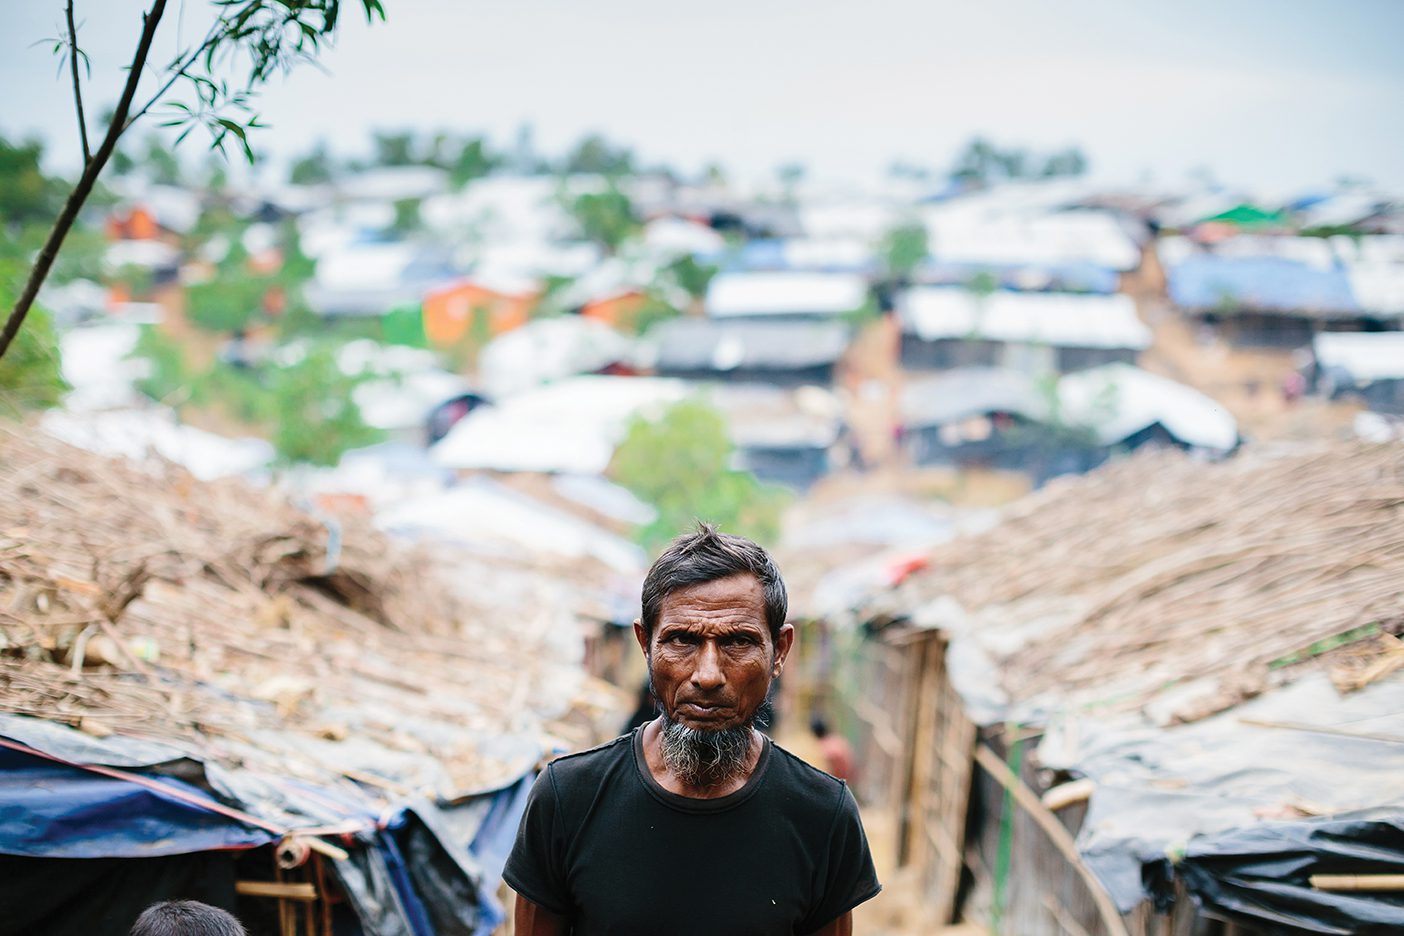 A Rohingya man walks in between grass huts in a refugee camp.